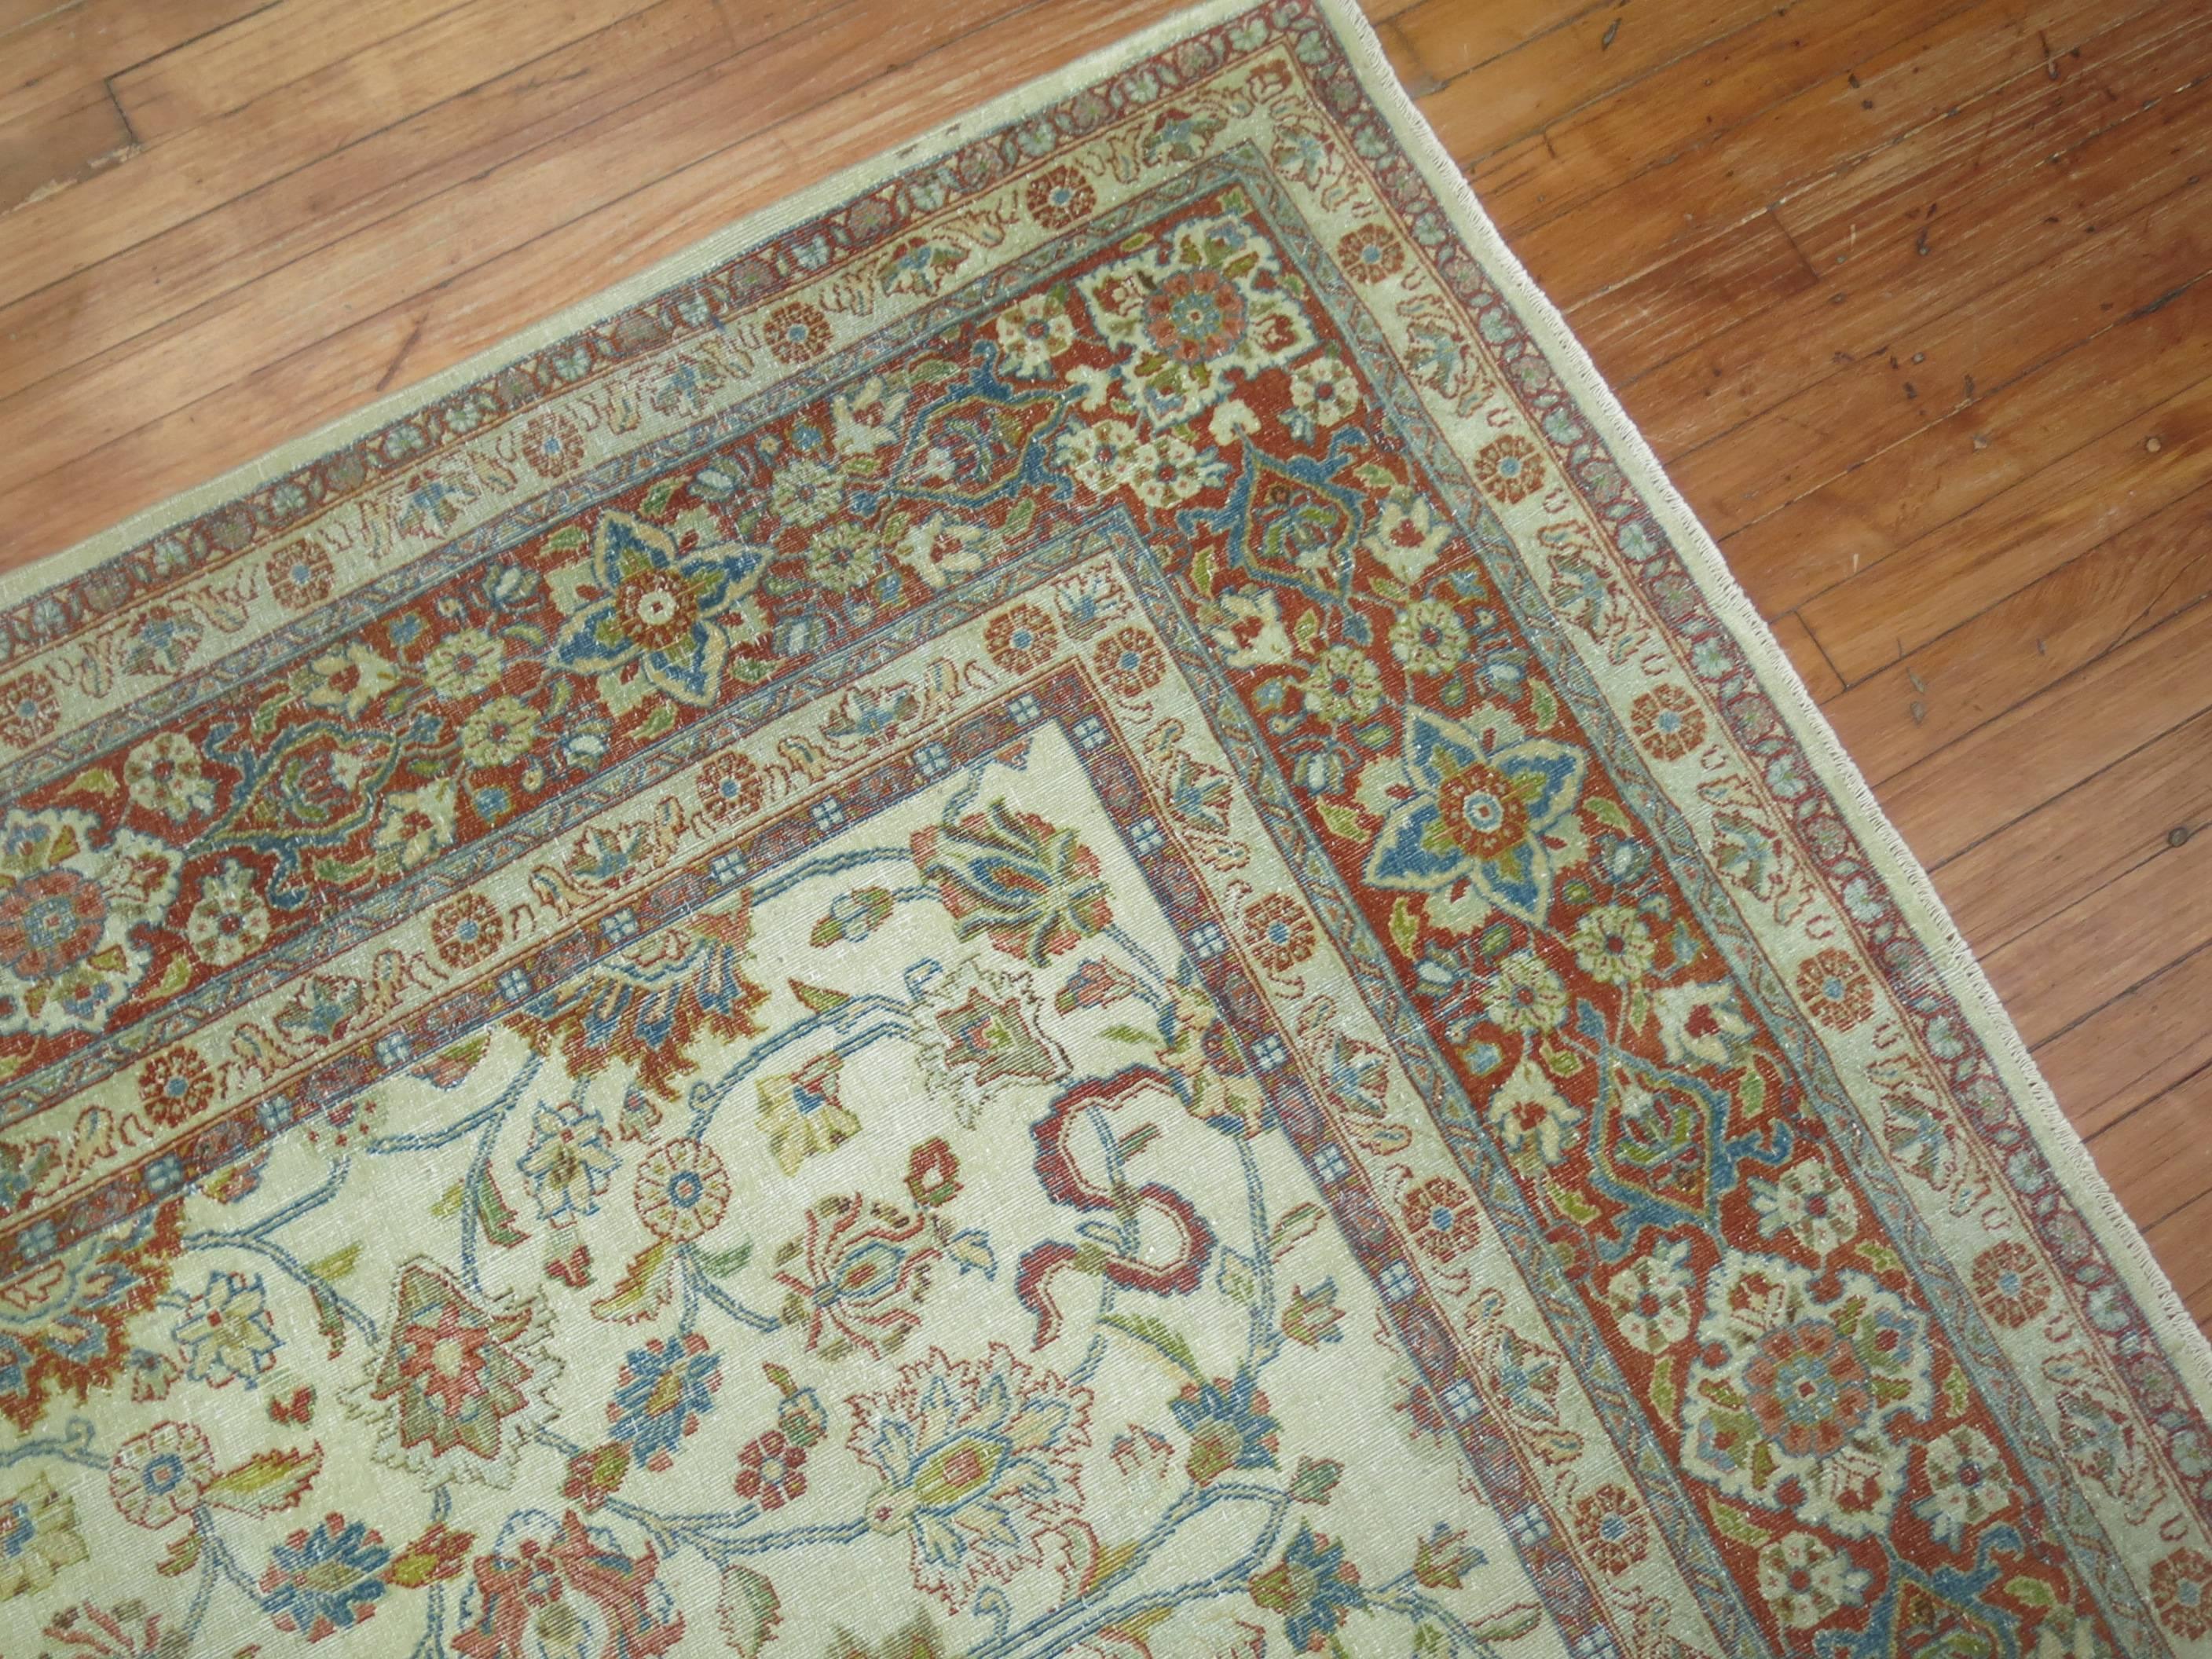 An early 20th century Persian Kashan rug consisting of an ivory field with soft accents in blue, green and red.

8'5'' x 11'5''